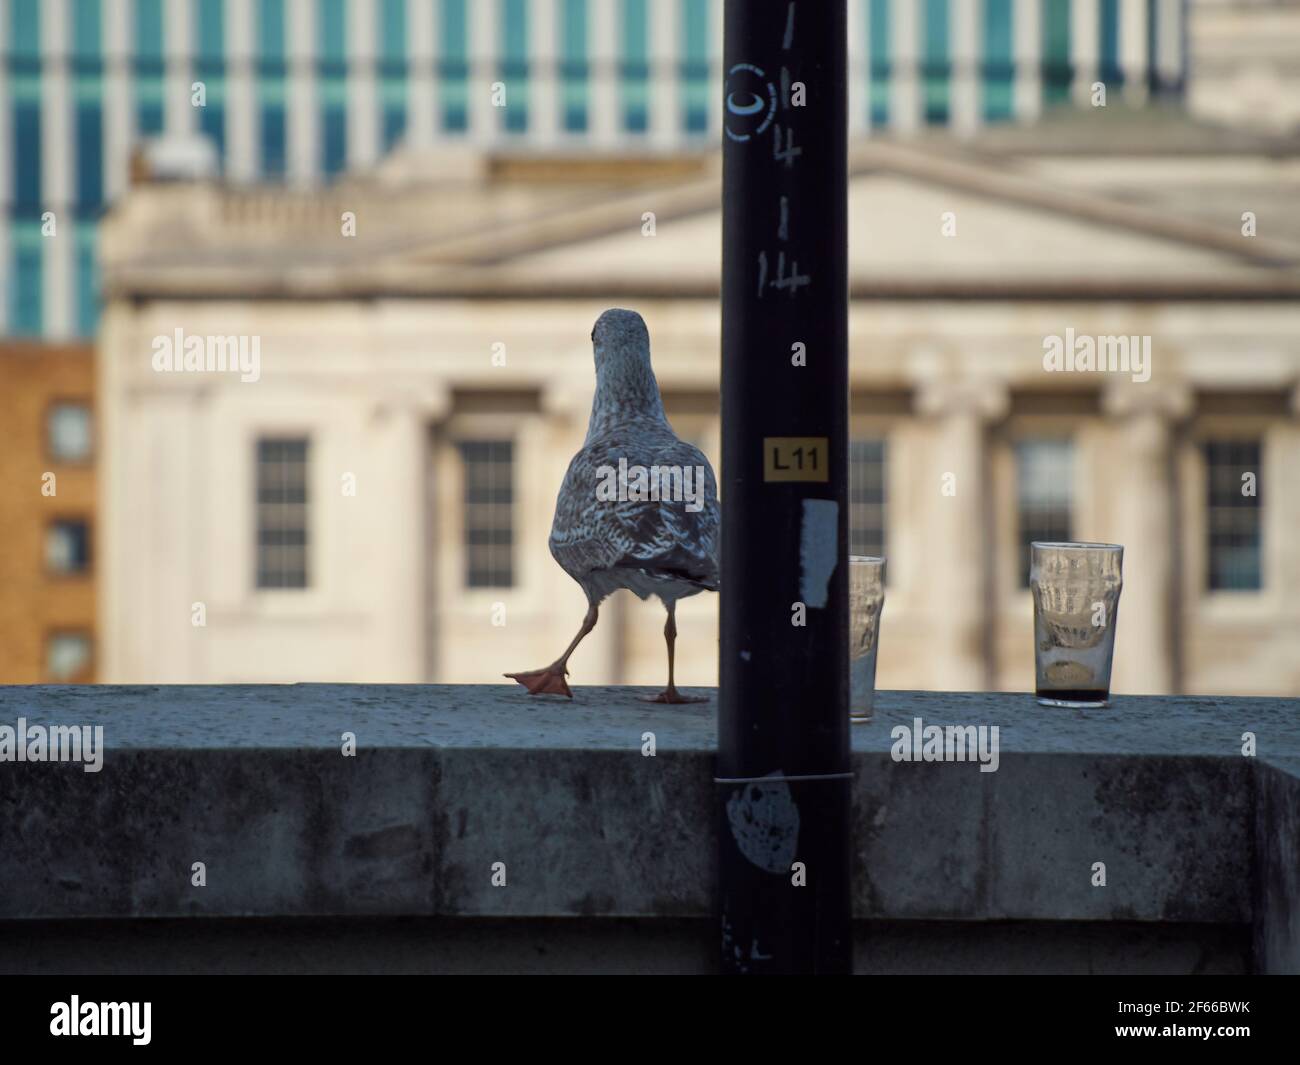 A gull next to two pint glasses, caught as it moves. It appear as though the gull is dancing around the lamp post, perhaps after emptying the glasses. Stock Photo